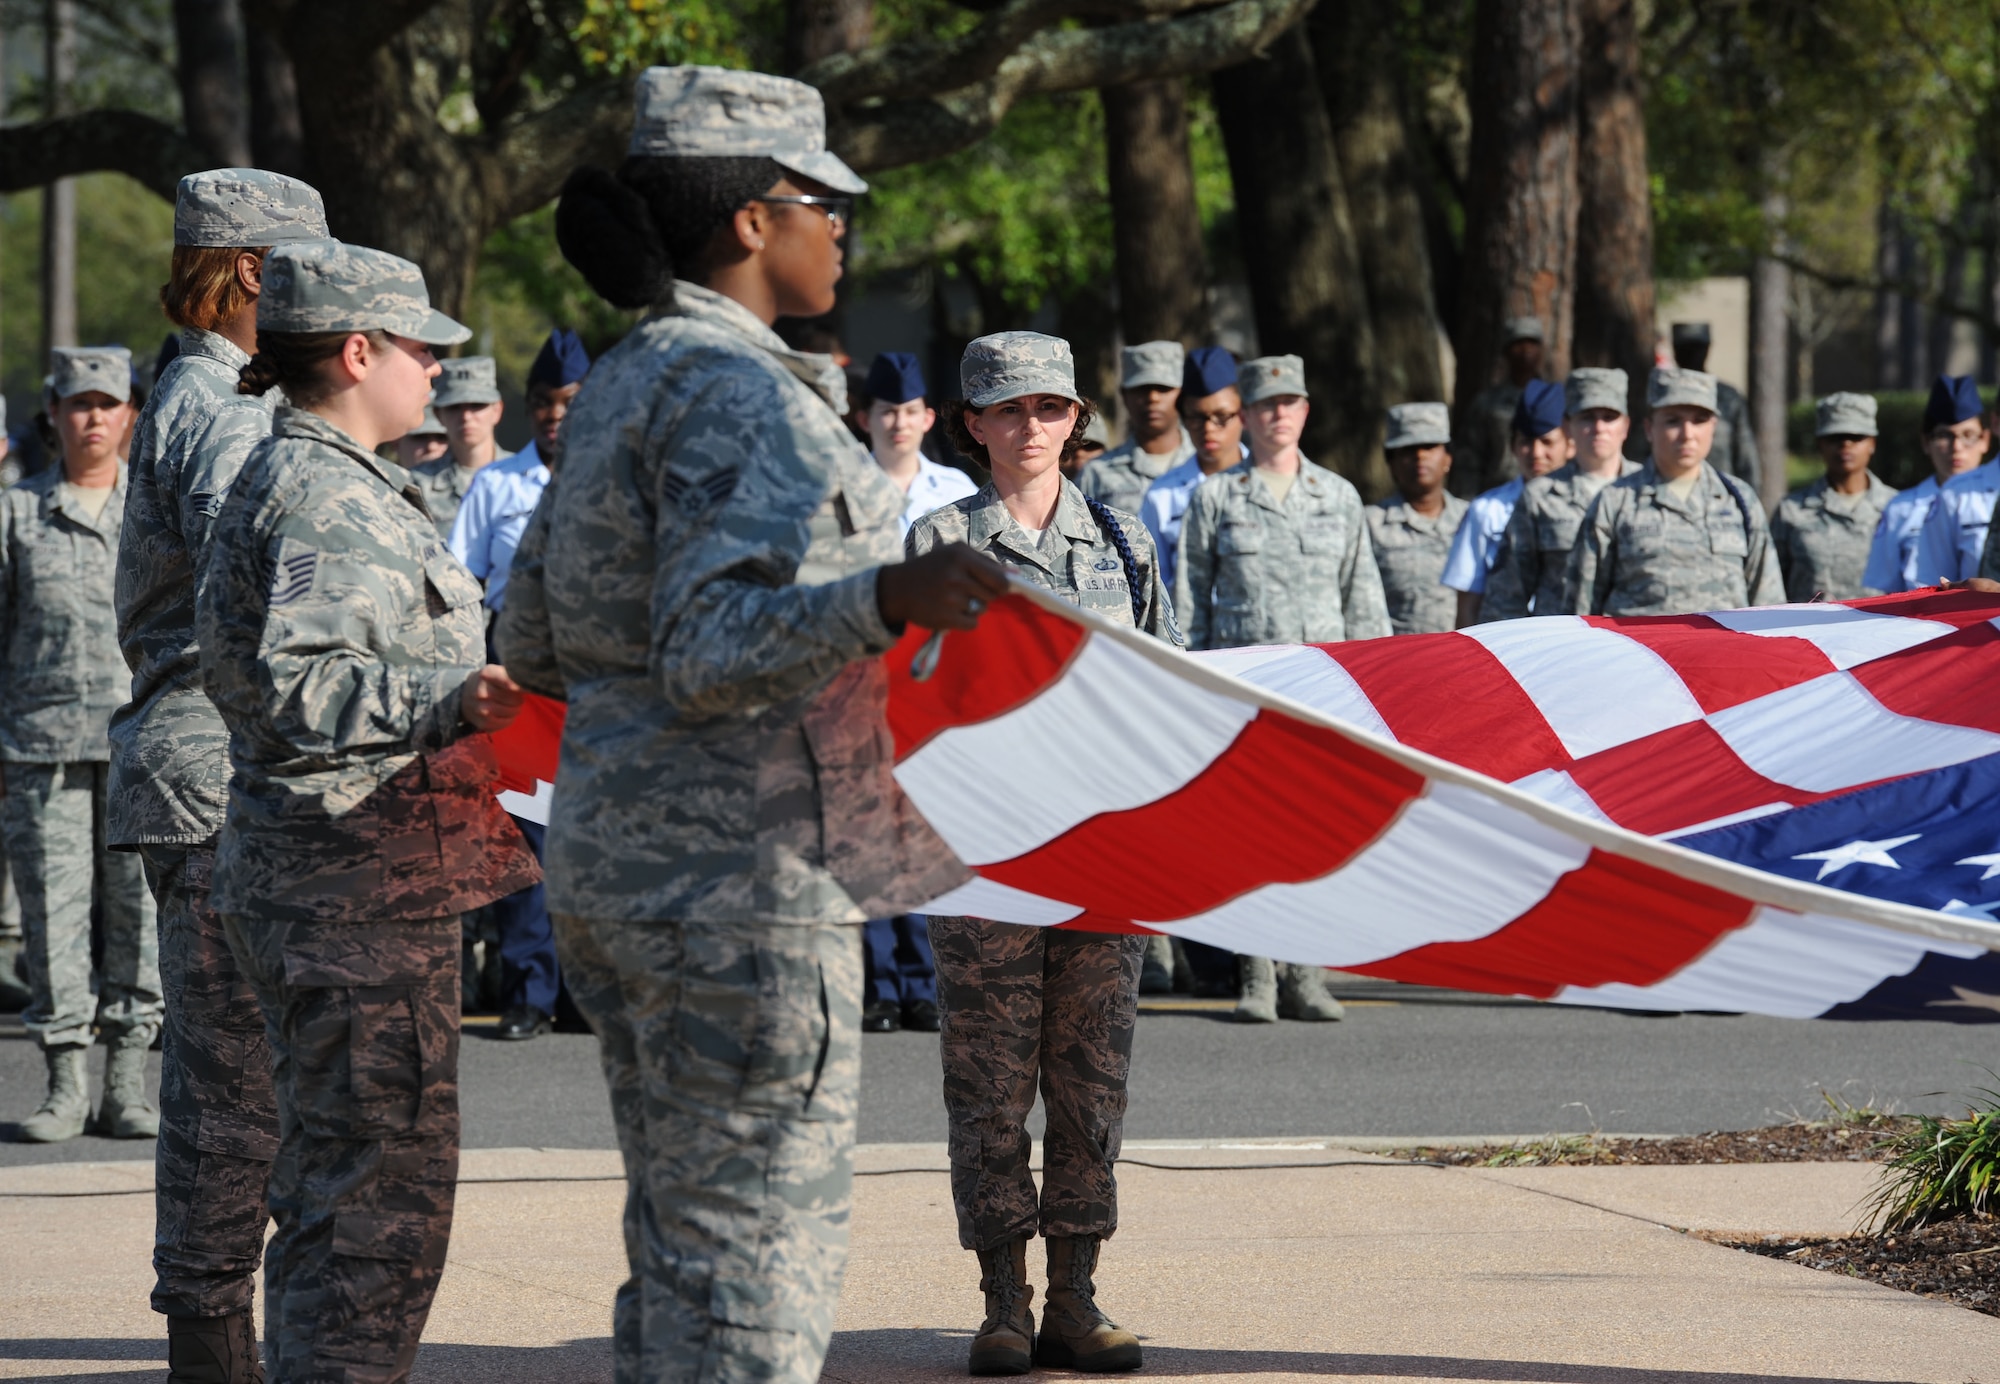 Master Sgt. Amber Pacheco, 81st Training Group Air National Guard liaison, participates in a flag folding ceremony during a Women’s History Month all-female retreat ceremony March 21, 2017, on Keesler Air Force Base, Miss. The theme of 2017 WHM is “Honoring Trailblazing Women in Labor and Business” to honor women who have successfully challenged the female role in business and the paid labor force (U.S. Air Force photo by Kemberly Groue)